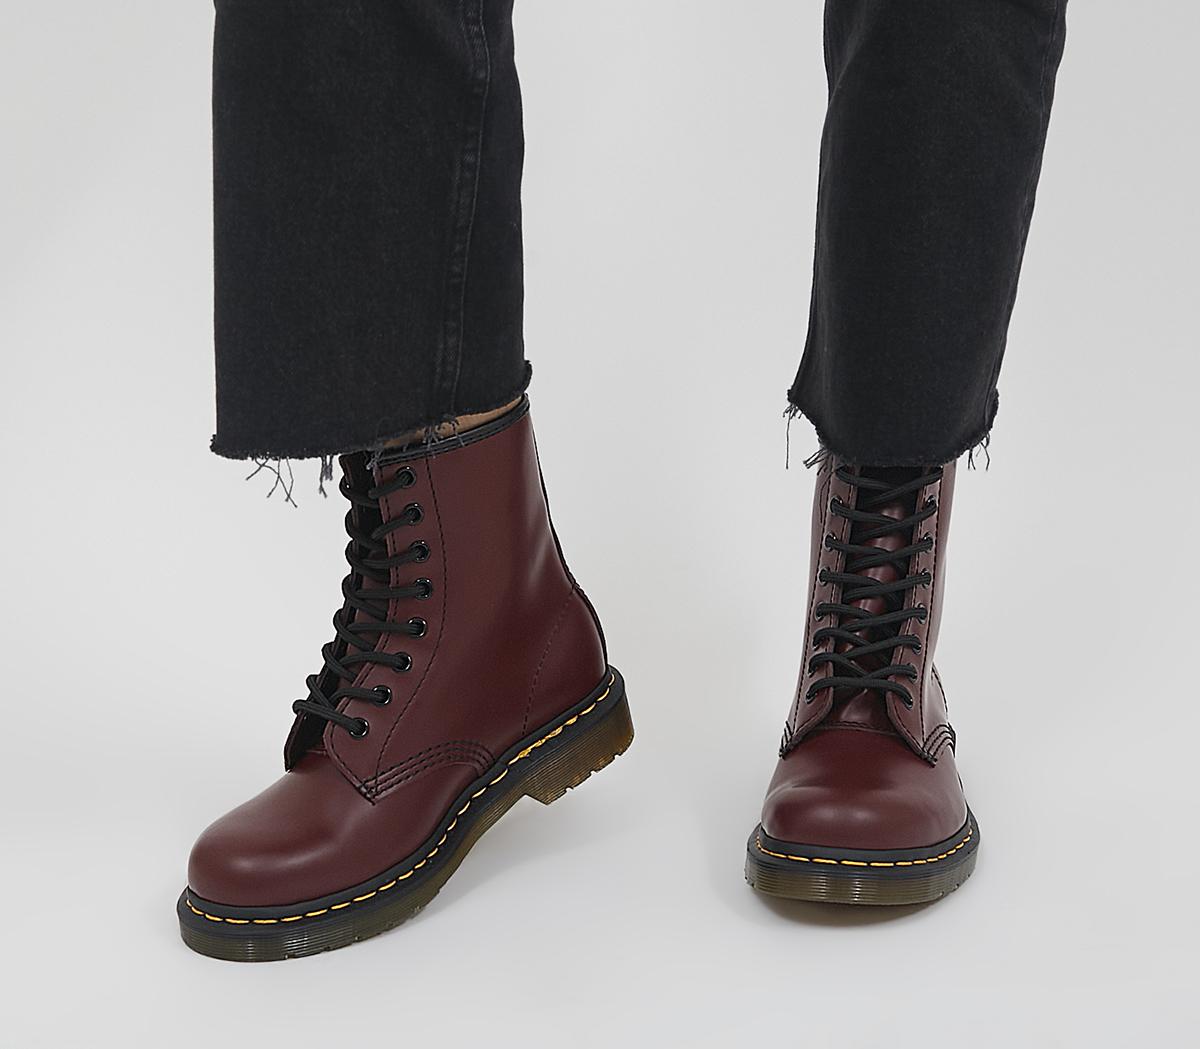 Dr. Martens 8 Eyelet Lace Up Boots Cherry Red - Ankle Boots